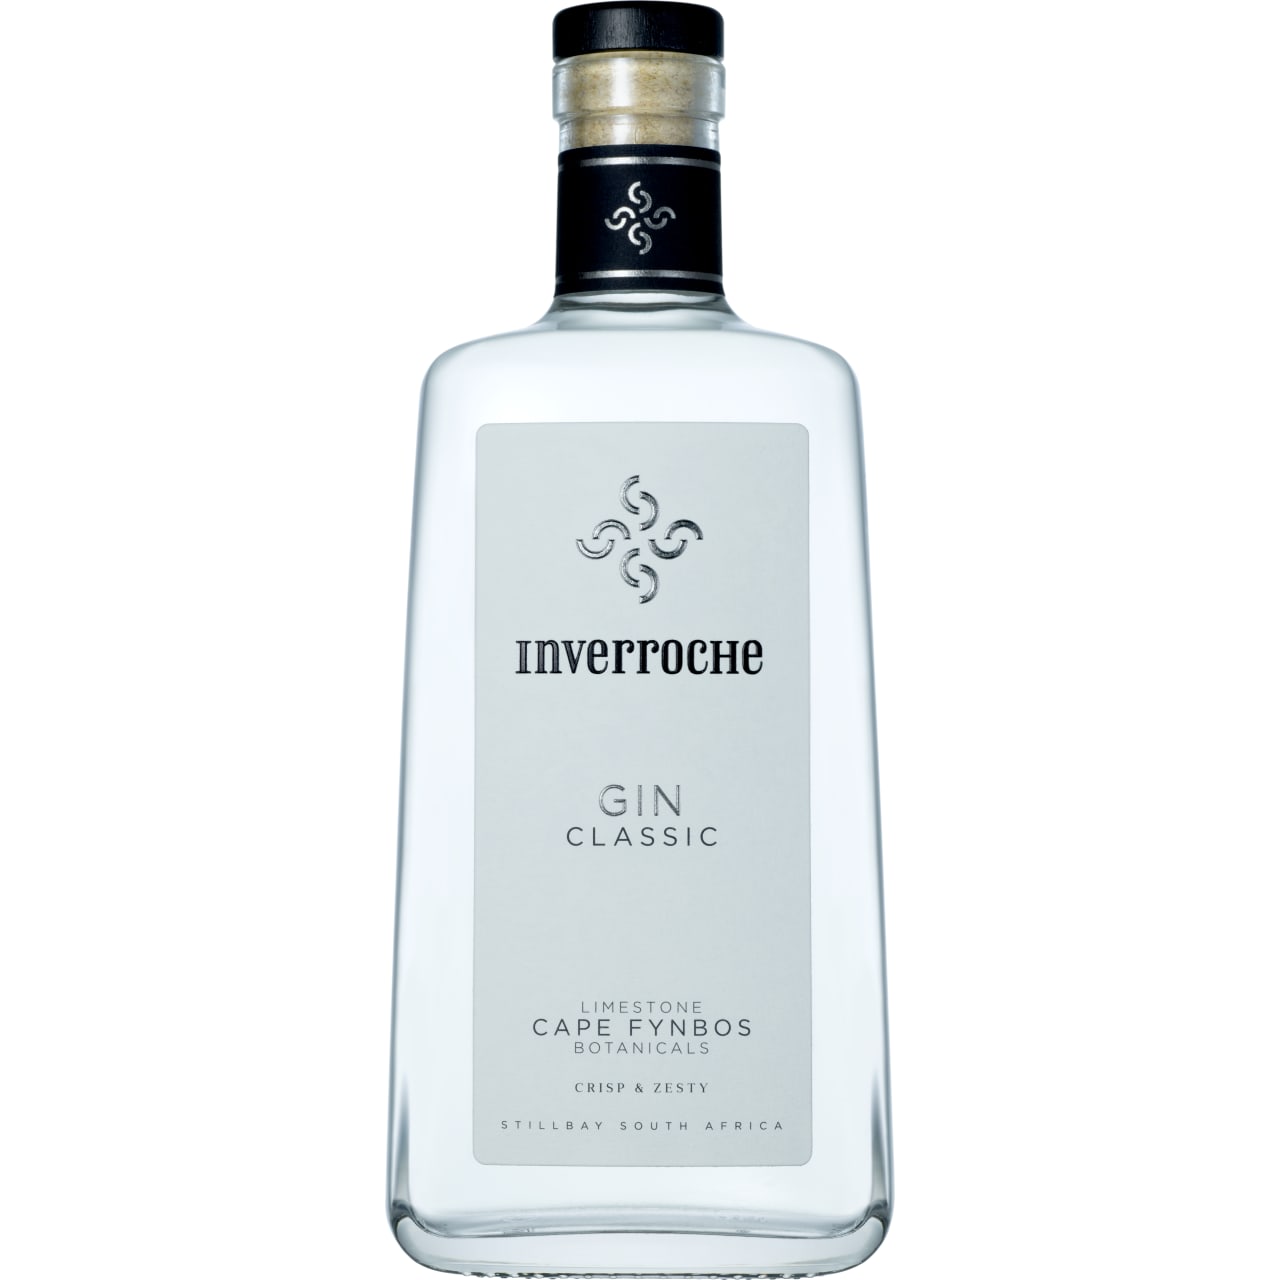 Infused with fynbos from the limestone-rich soils of the lowlands of the Cape Floral Kingdom, Inverroche Gin Classic is crispy and dry with upfront green, grassy juniper notes which blend seamlessly with a bouquet of soft flowers on the nose.